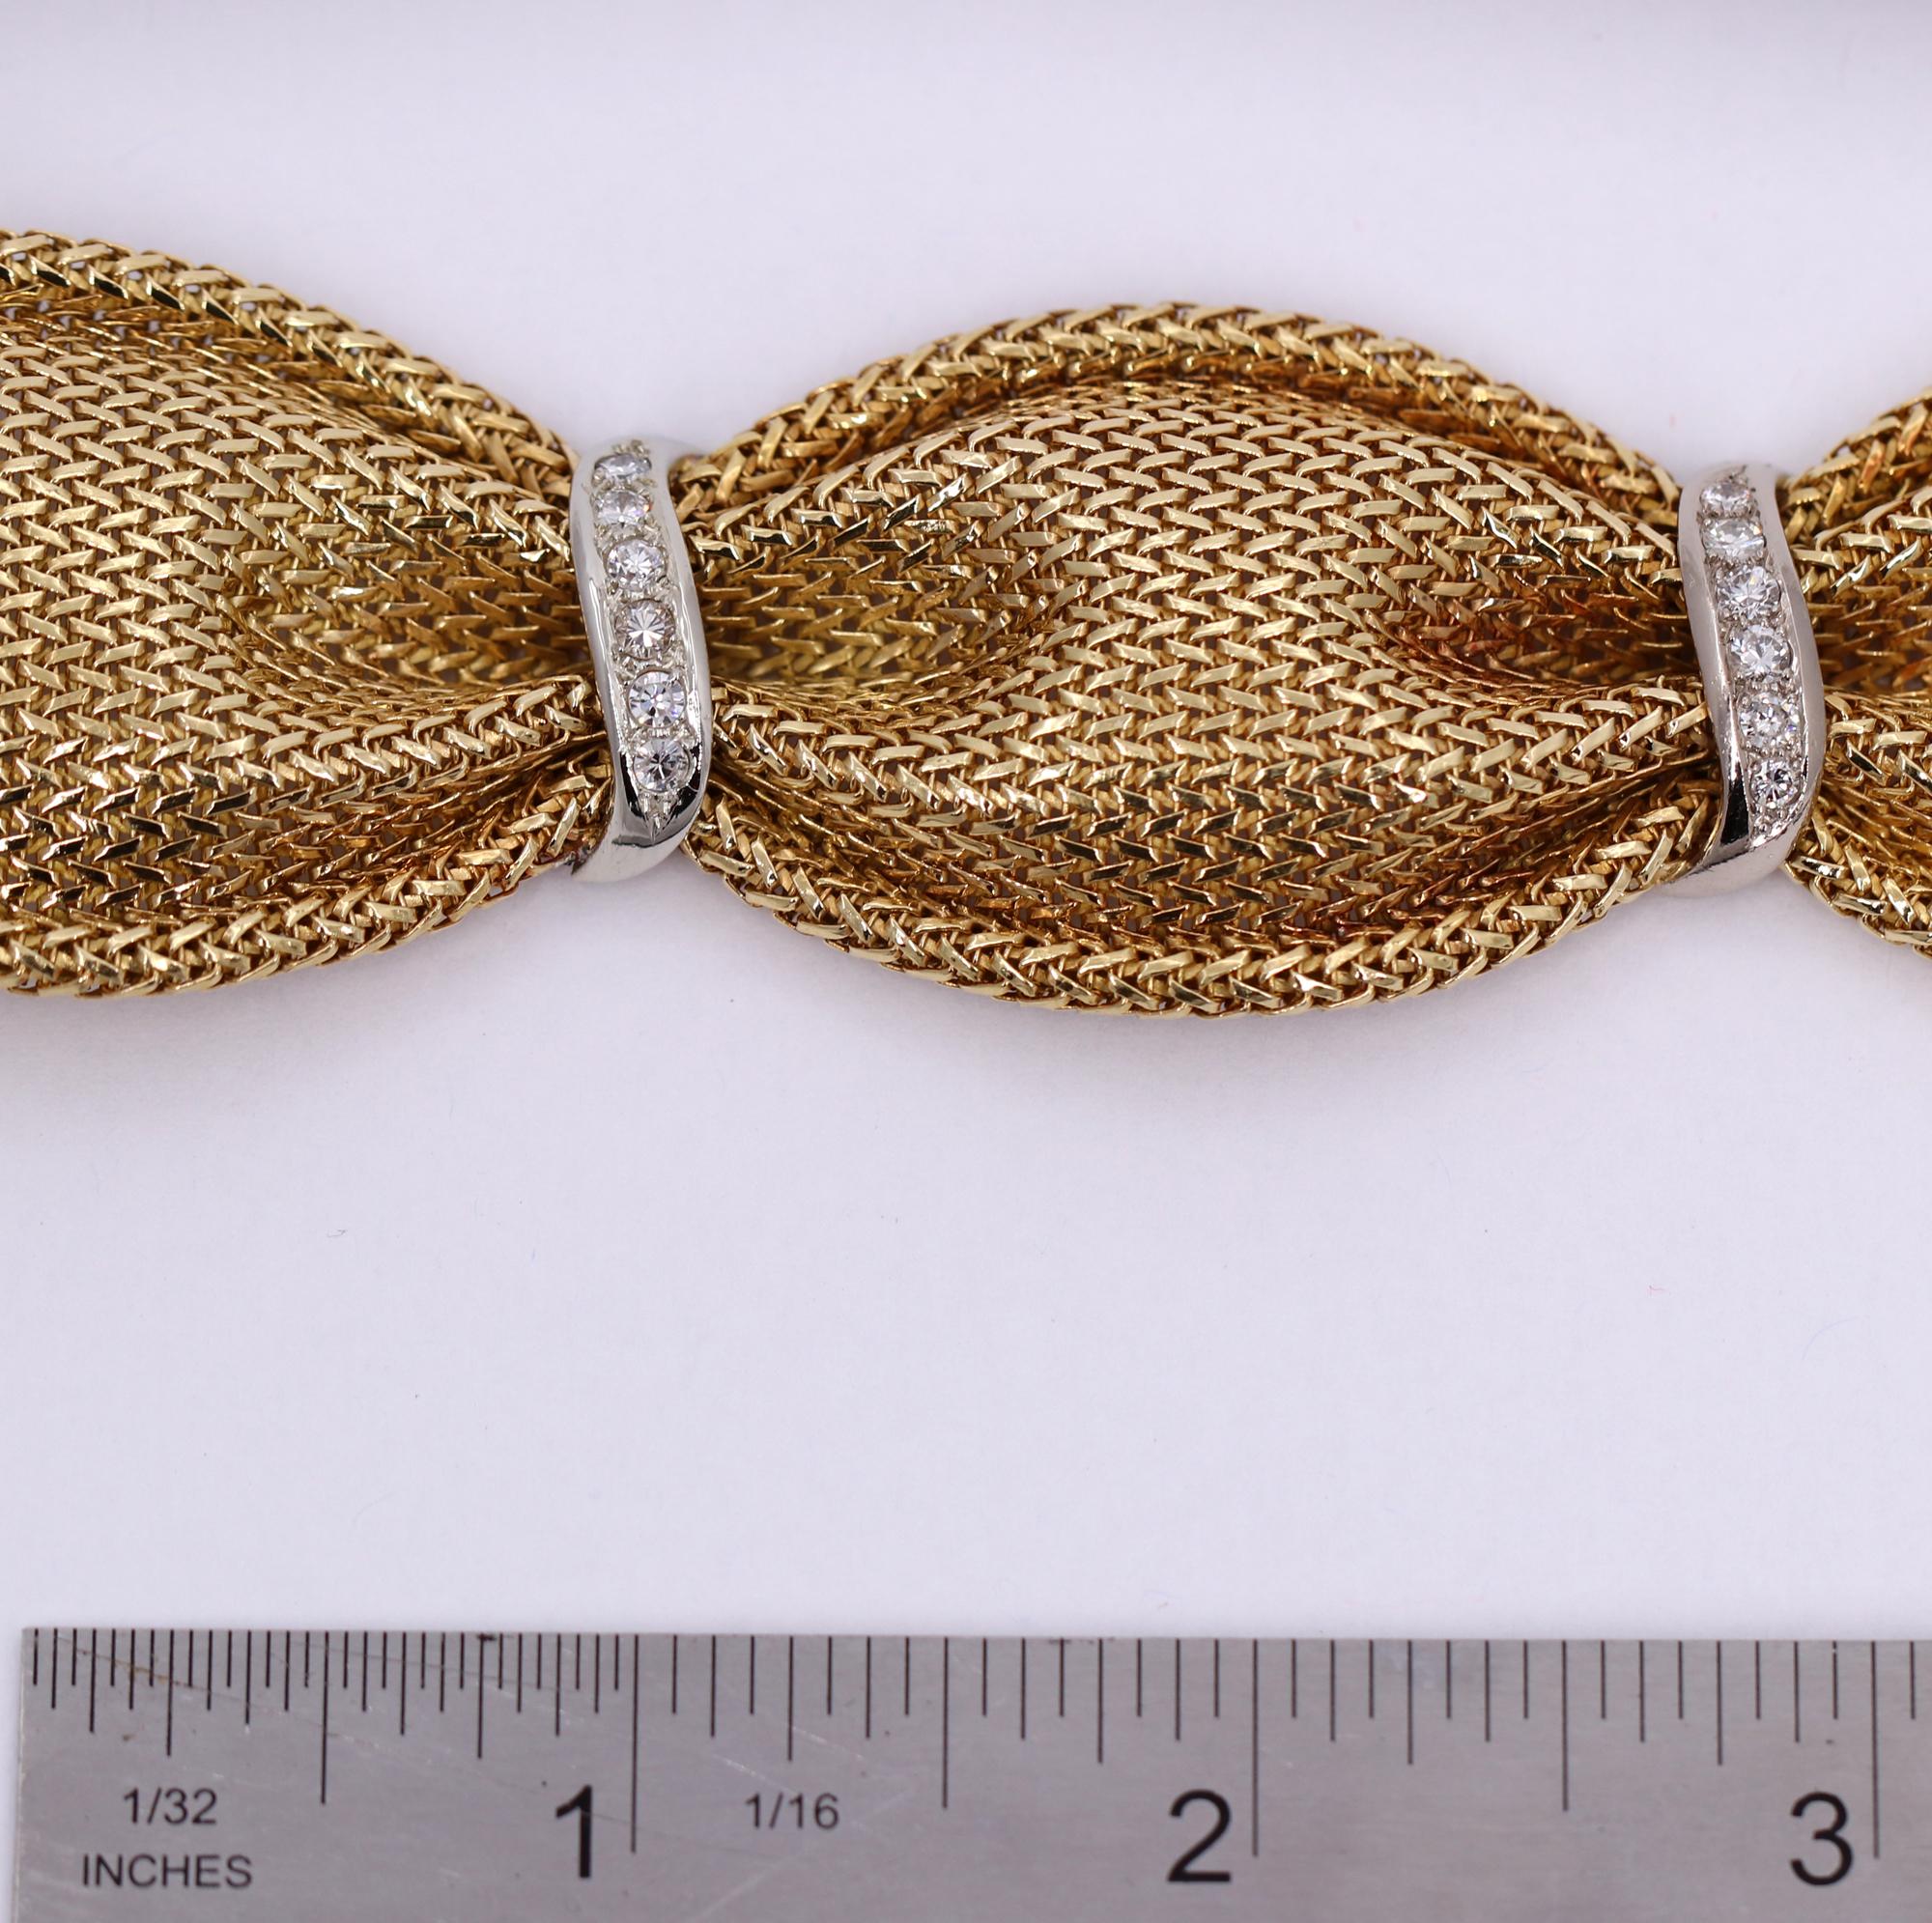 European Gold Mesh Bracelet with White Gold and Diamond Stations 4